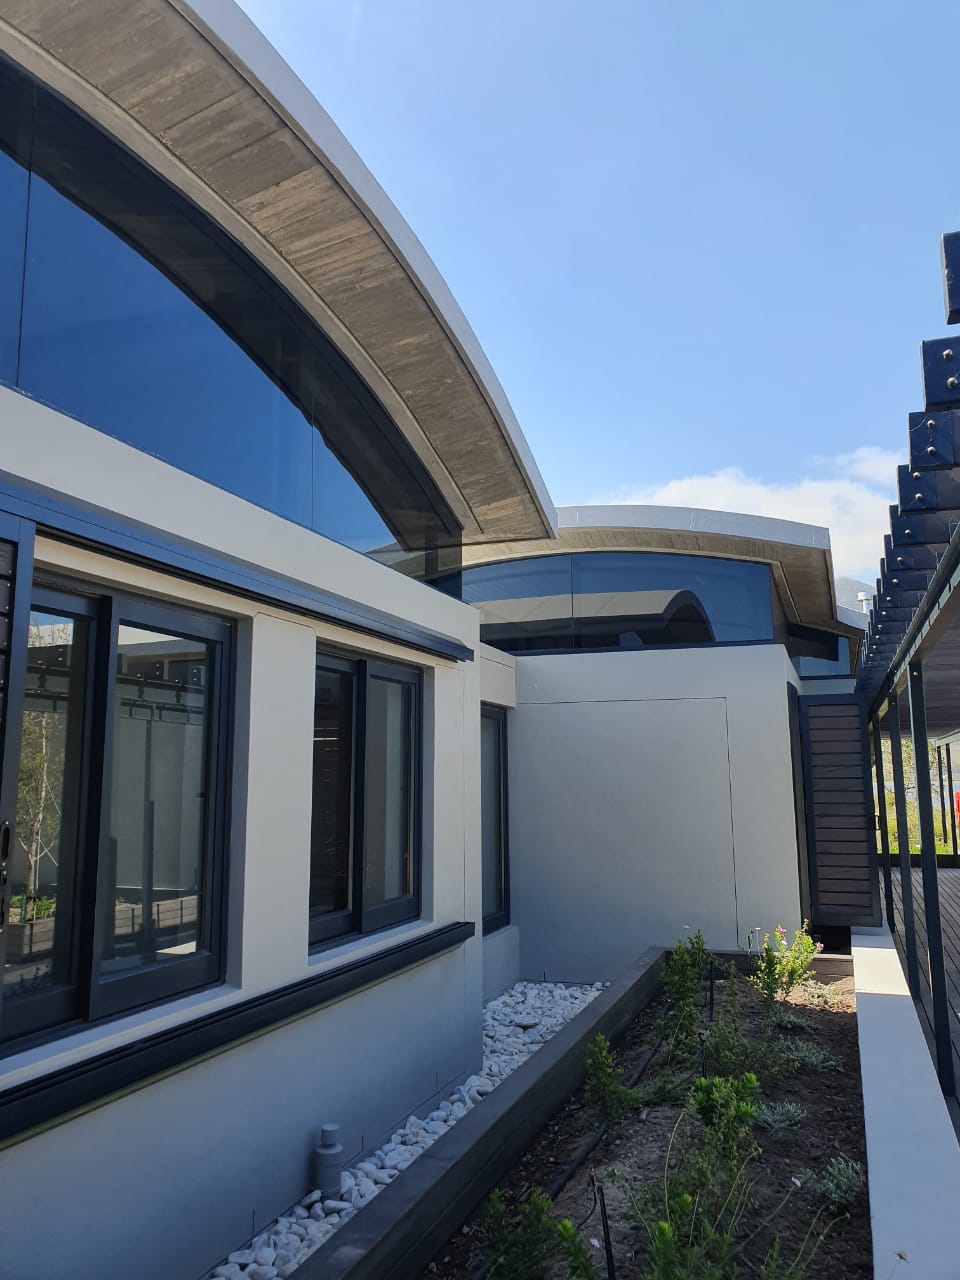 Curved concrete roofing with glass inserts by Hu Art